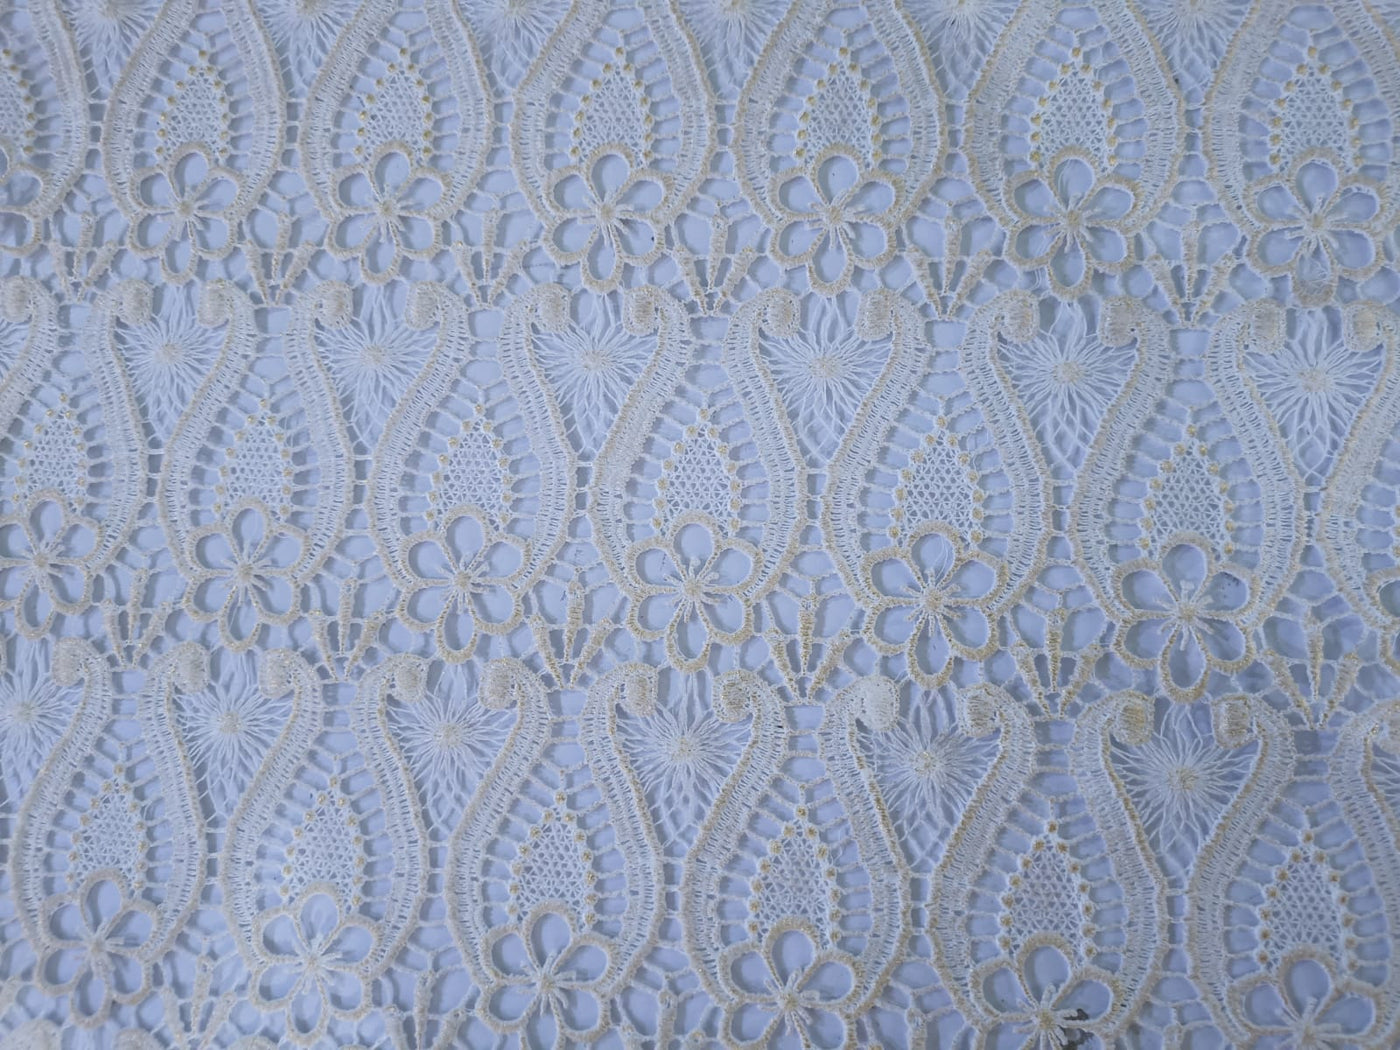 LACE: Rich Chemical Lace Fabric 44" IVORY GOLD color